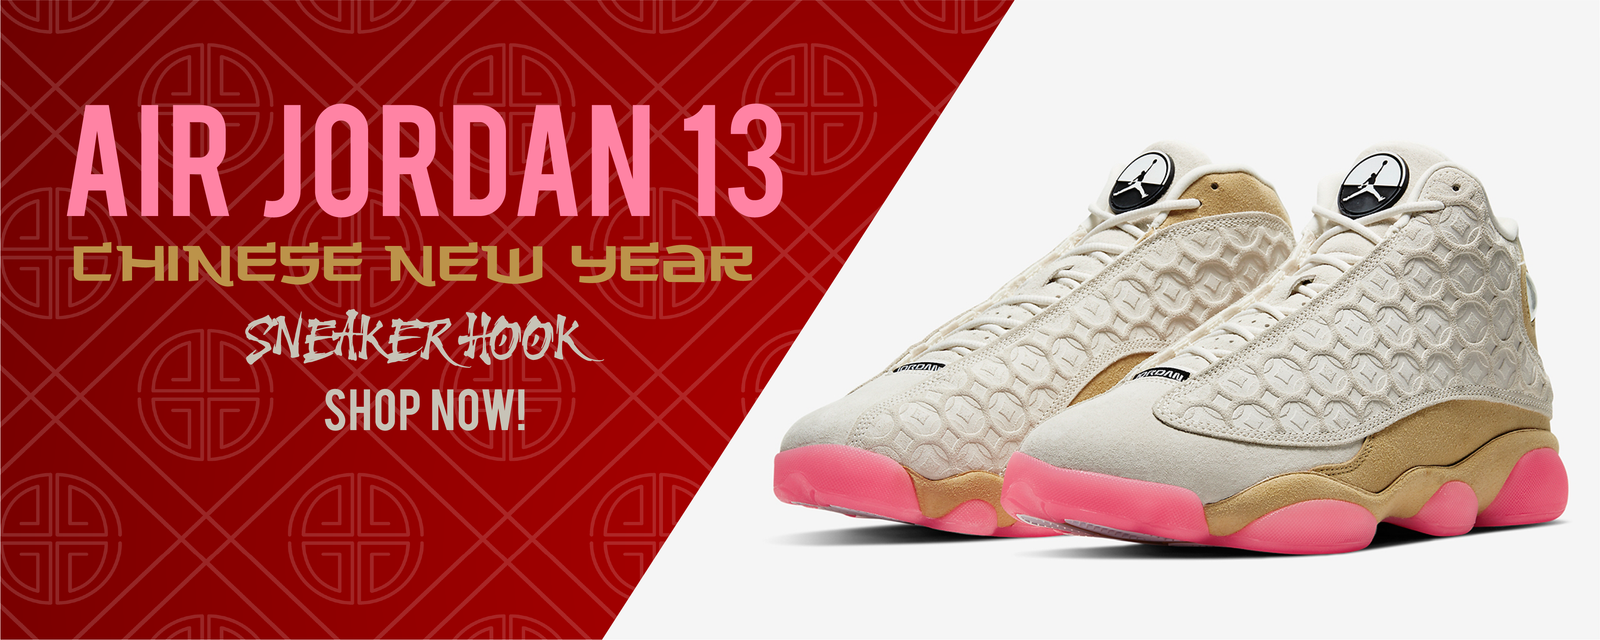 jordan 13 chinese new year clothes